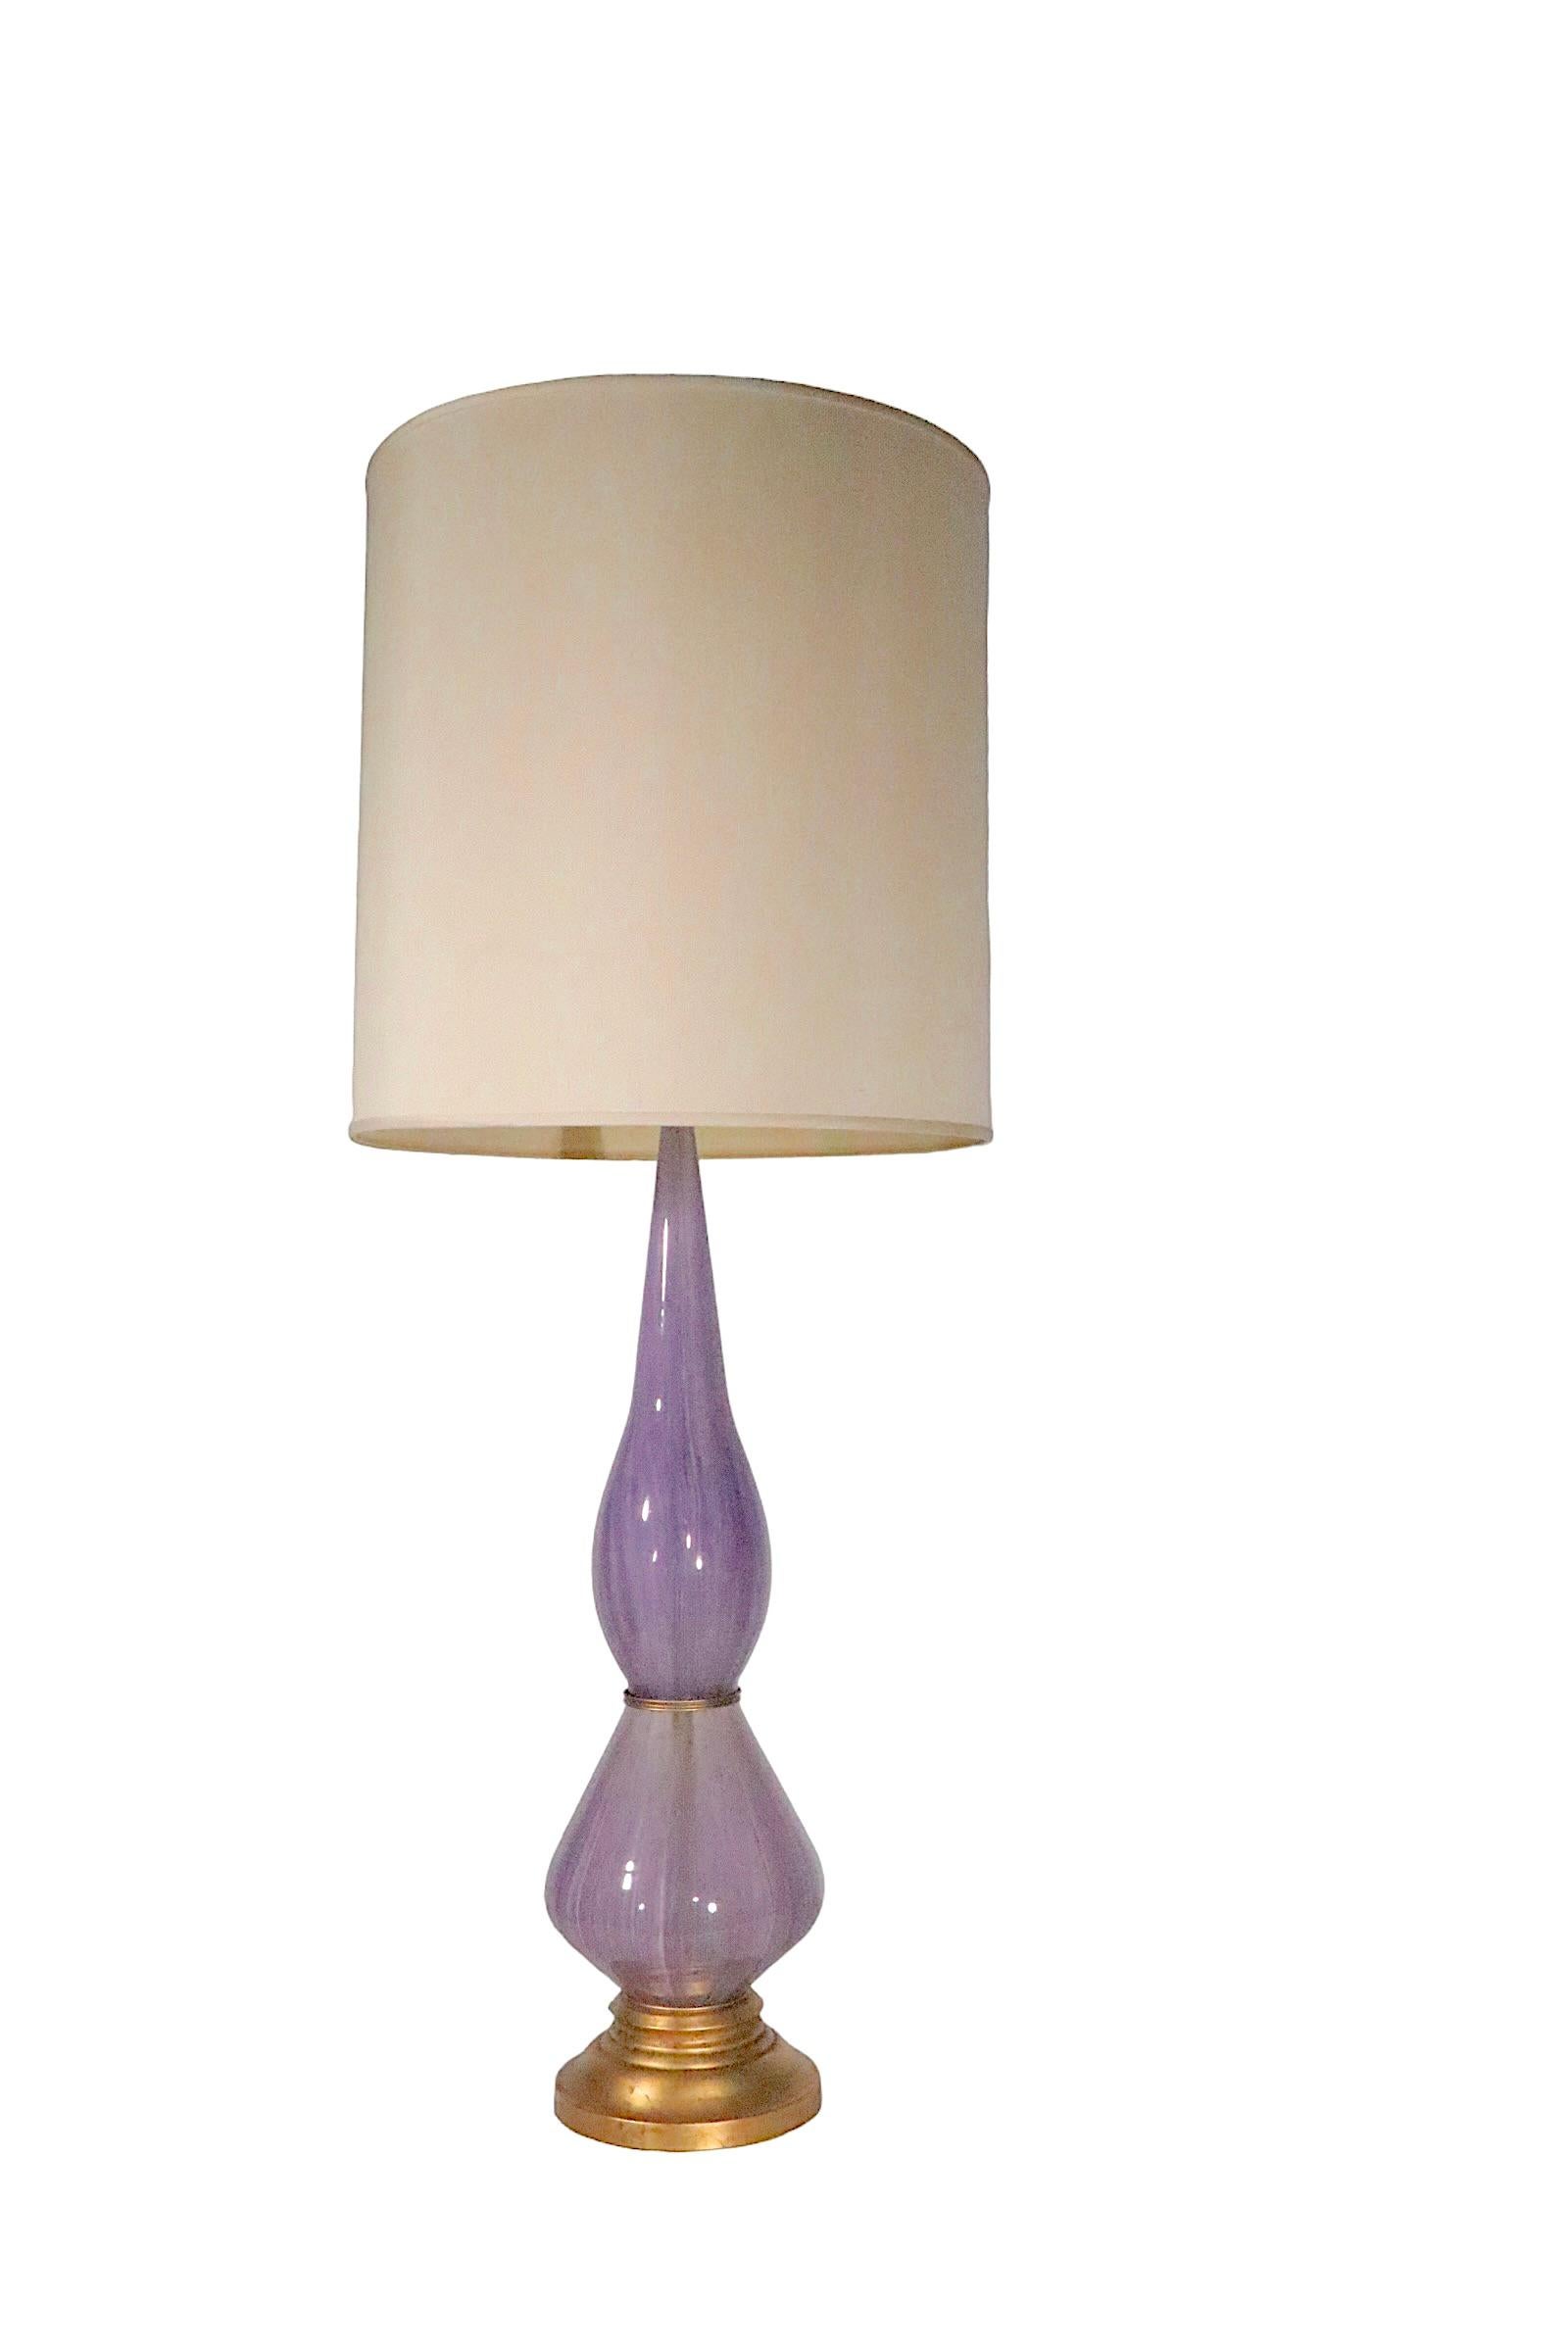 Large Murano Glass Table Lamp in Lavender Glass, circa 1950/1960s For Sale 1